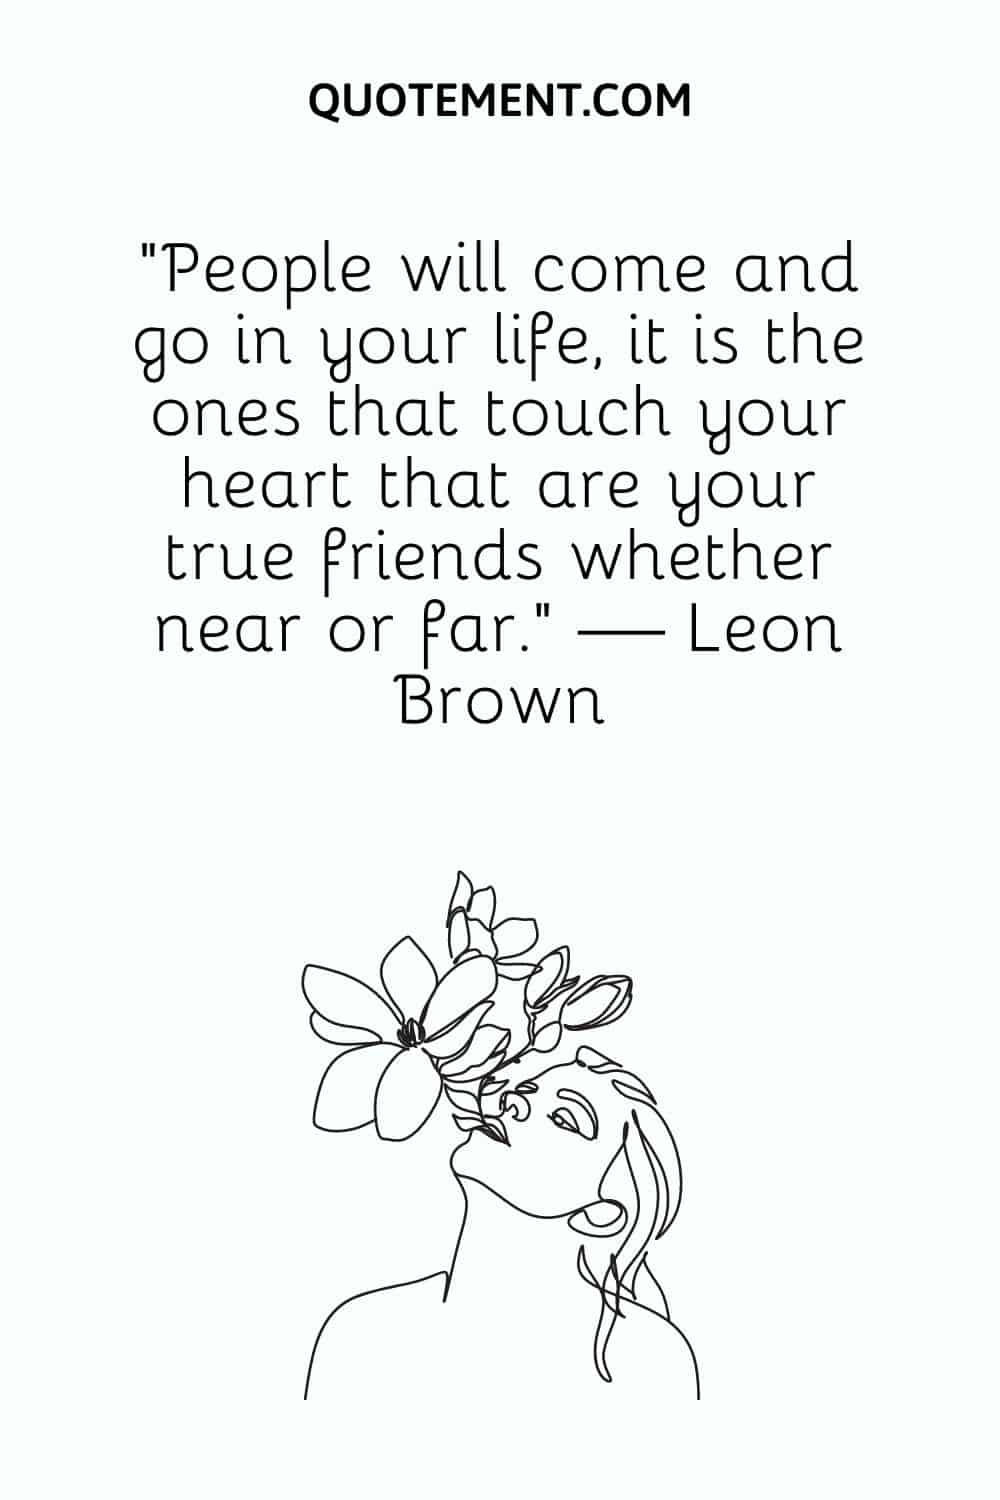 People will come and go in your life, it is the ones that touch your heart that are your true friends whether near or far.